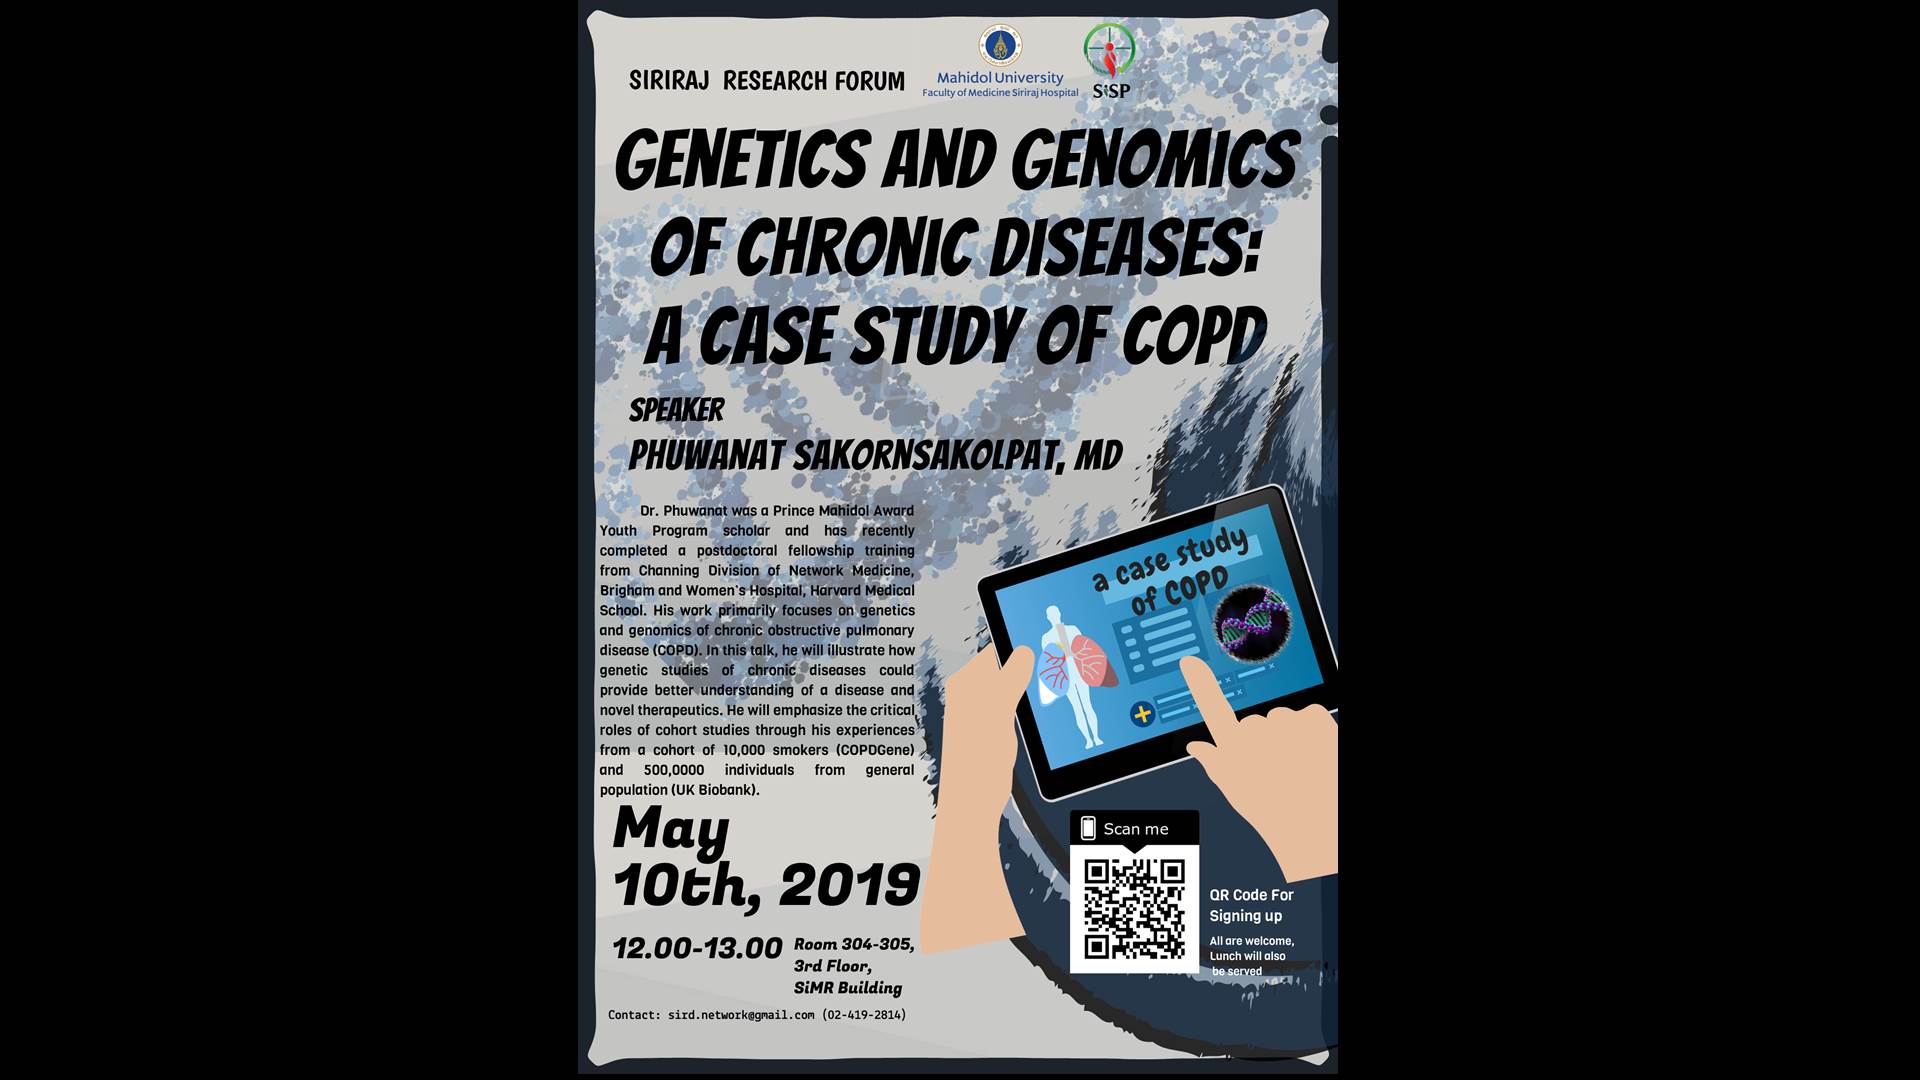 Siriraj Research Forum “Genetics and Genomics of Chronic Diseases: a Case Study of COPD”